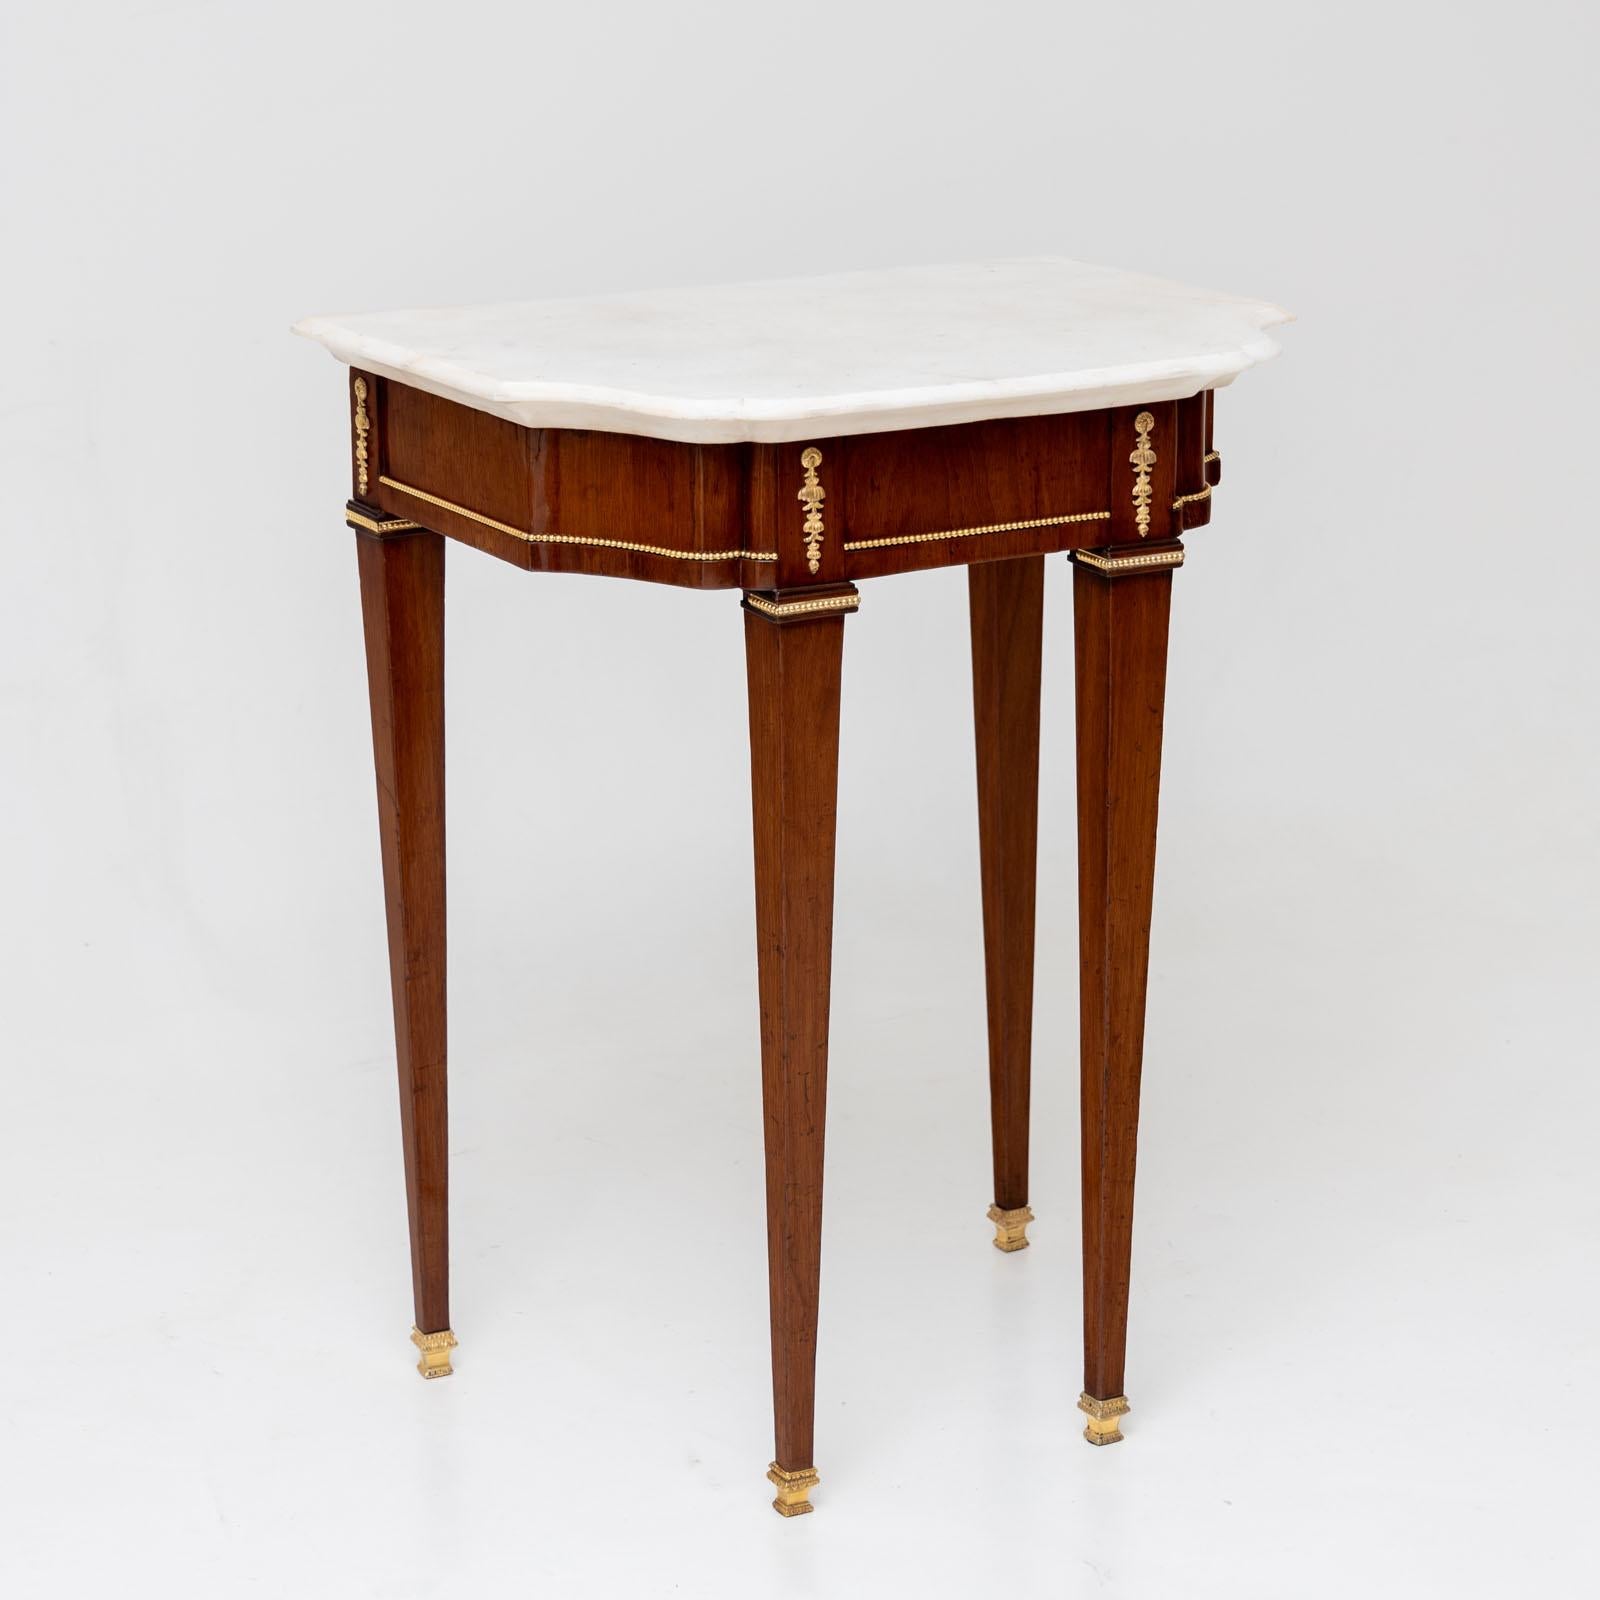 Neoclassical console table with white marble top and gilded applications. The console stands on tall, slender square legs with brass sabots. It is veneered in mahogany and has been professionally refurbished and polished.